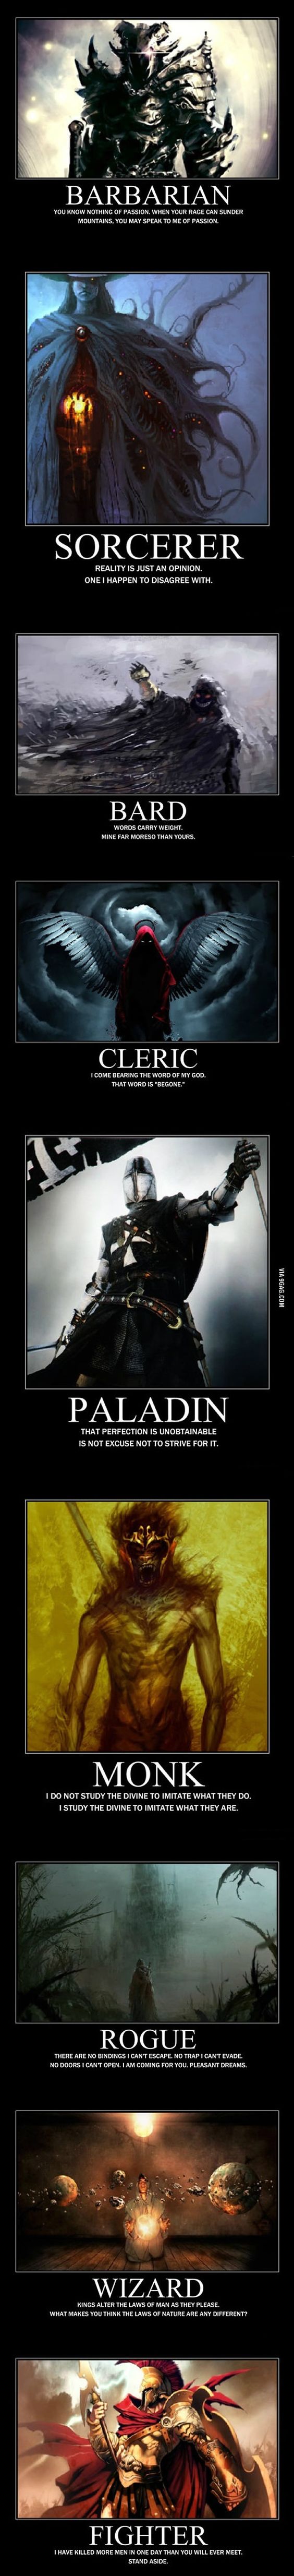 If i had to choose, monk, rogue, or paladin. Those 3 have always been my favorite 3 class in any game with a class system